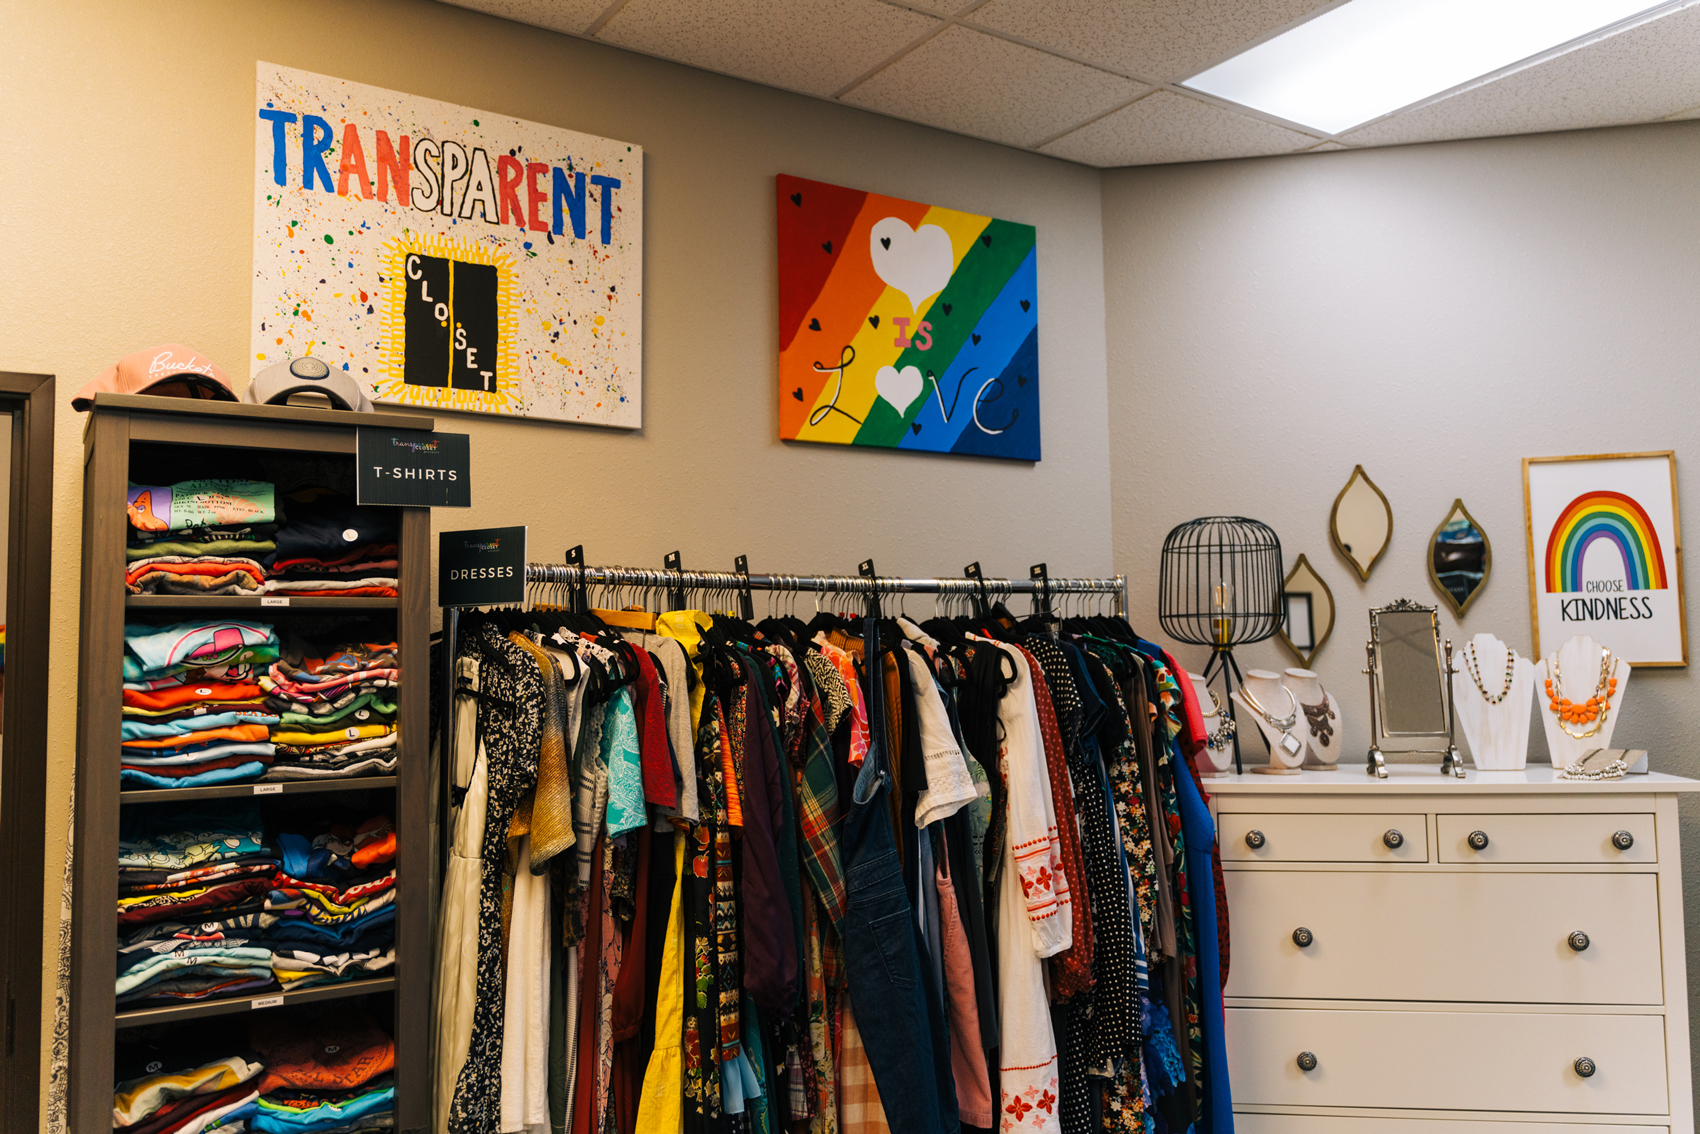 Transparent Closet, a clothing boutique designed for trans and exploring teens, youth and young adults